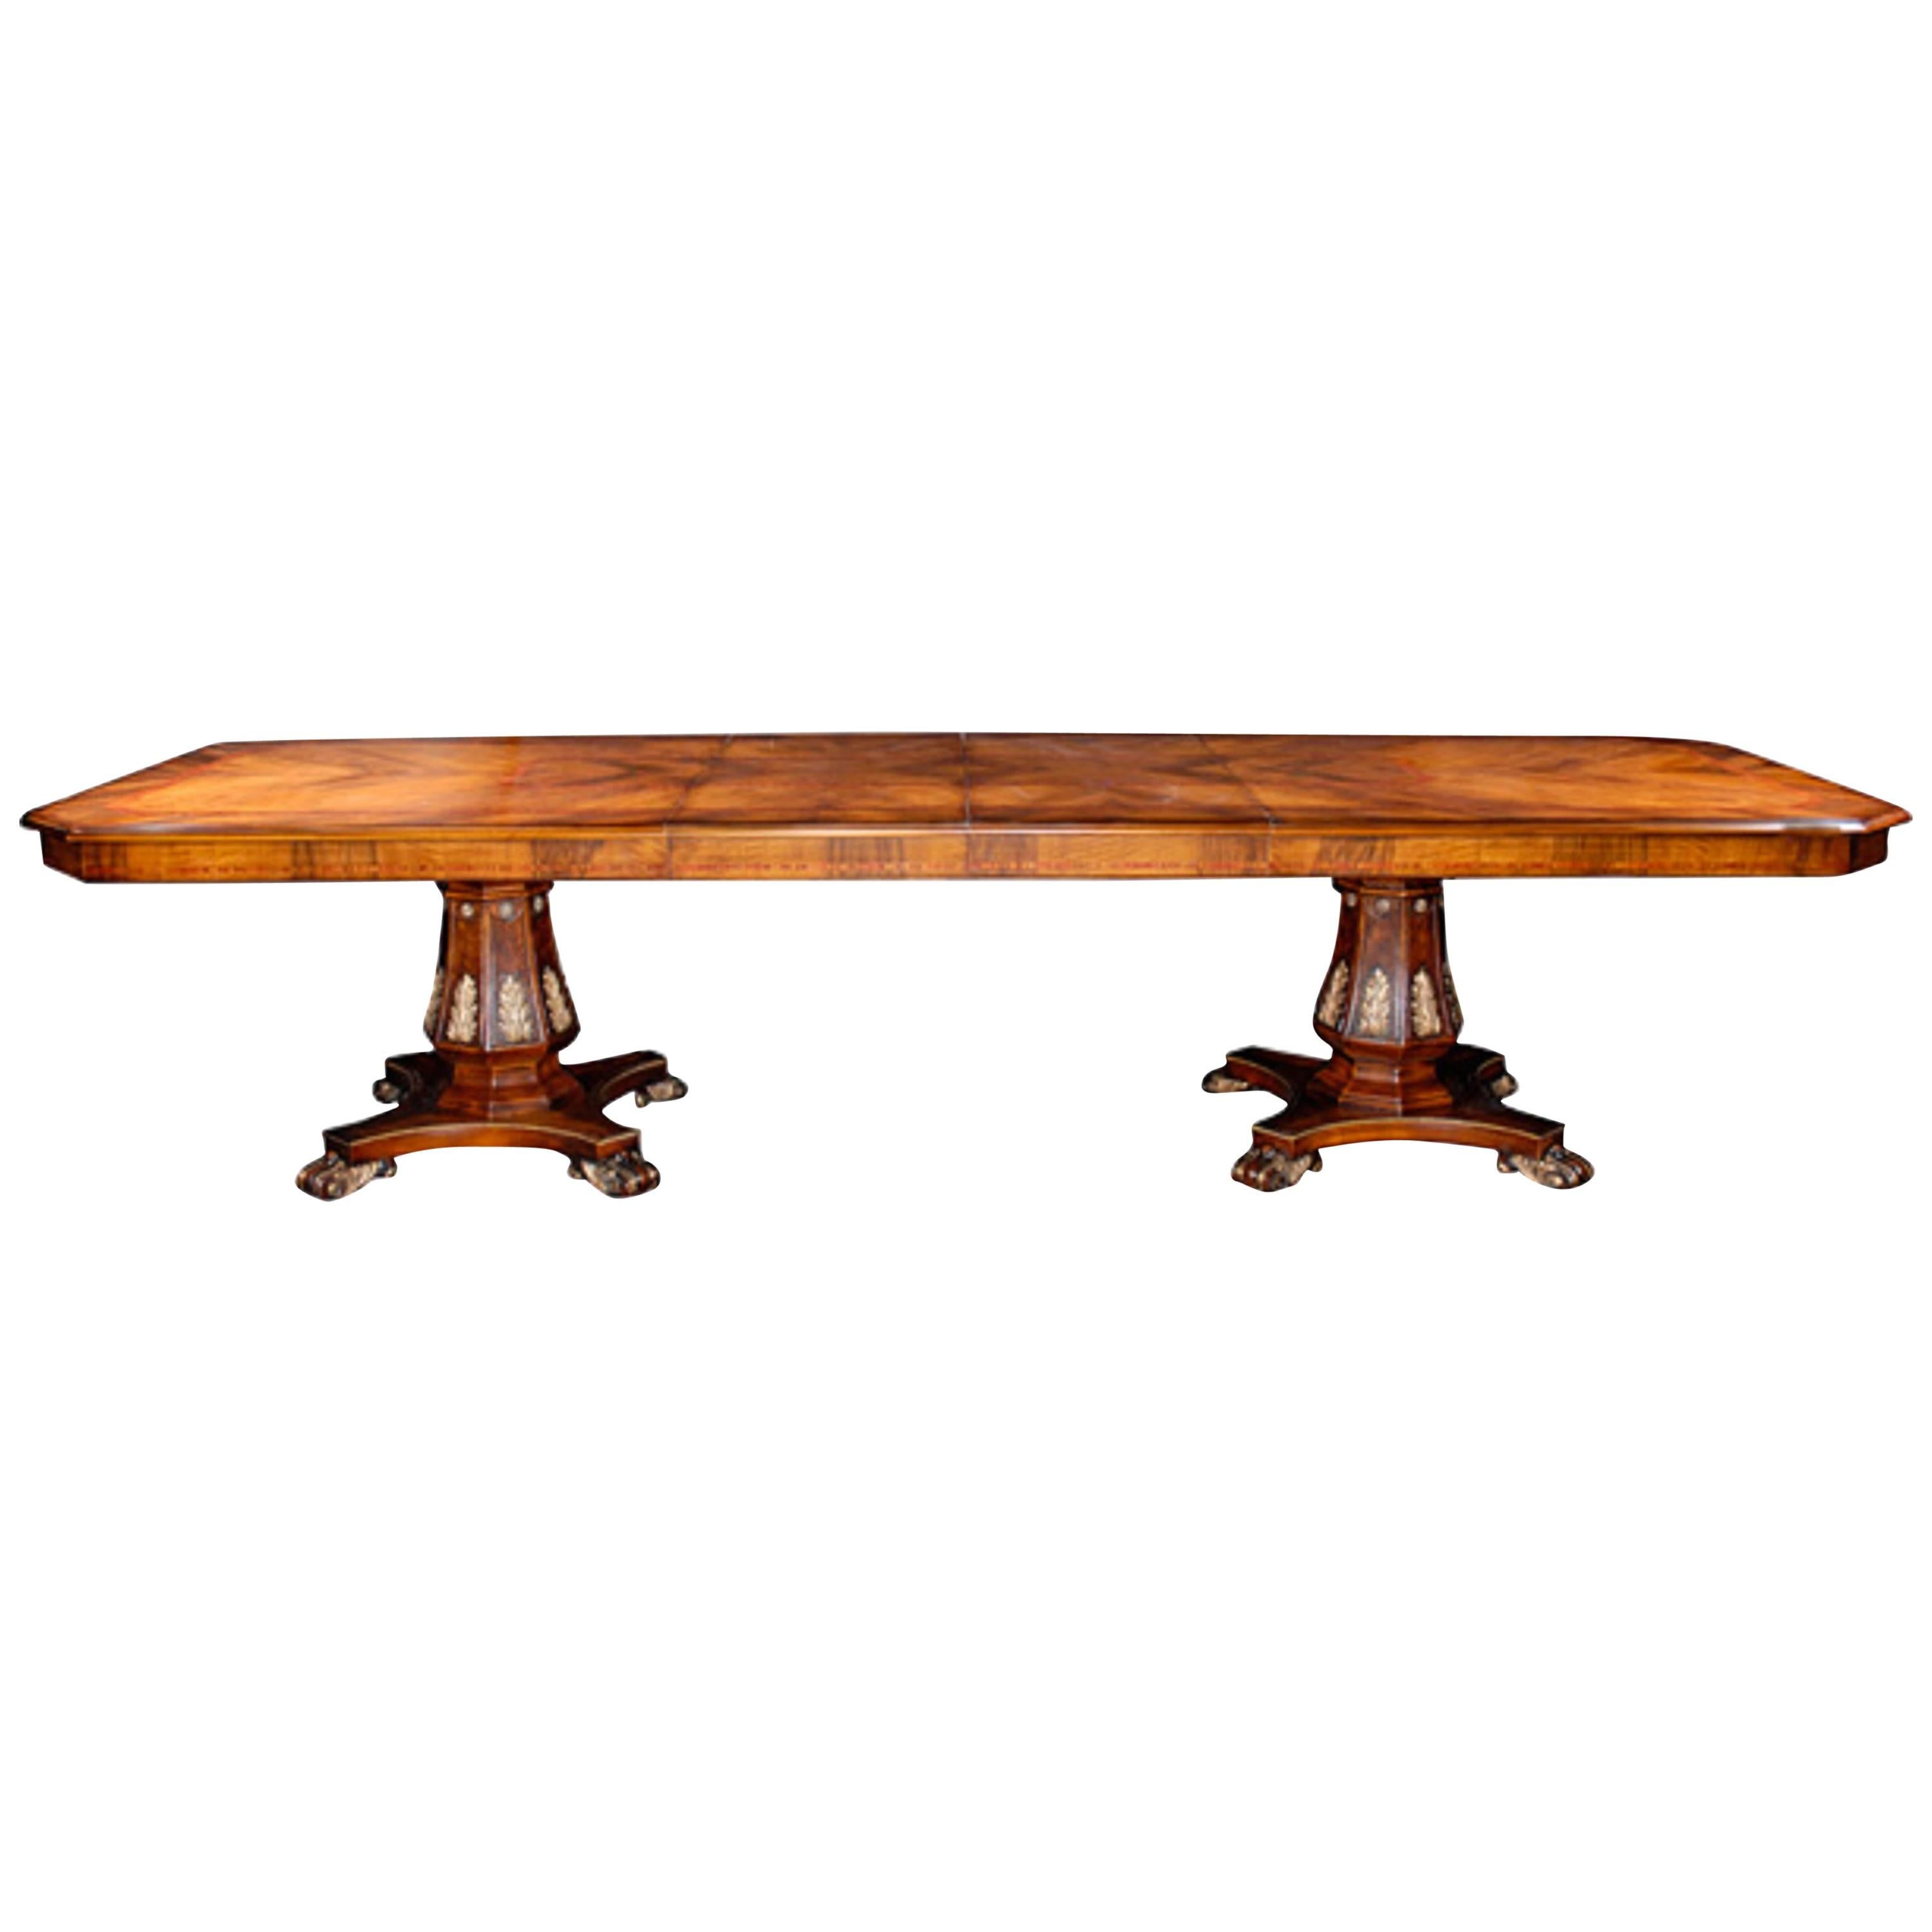 19th Century Style Rectangle Dining Table designed by Renaissance Collection